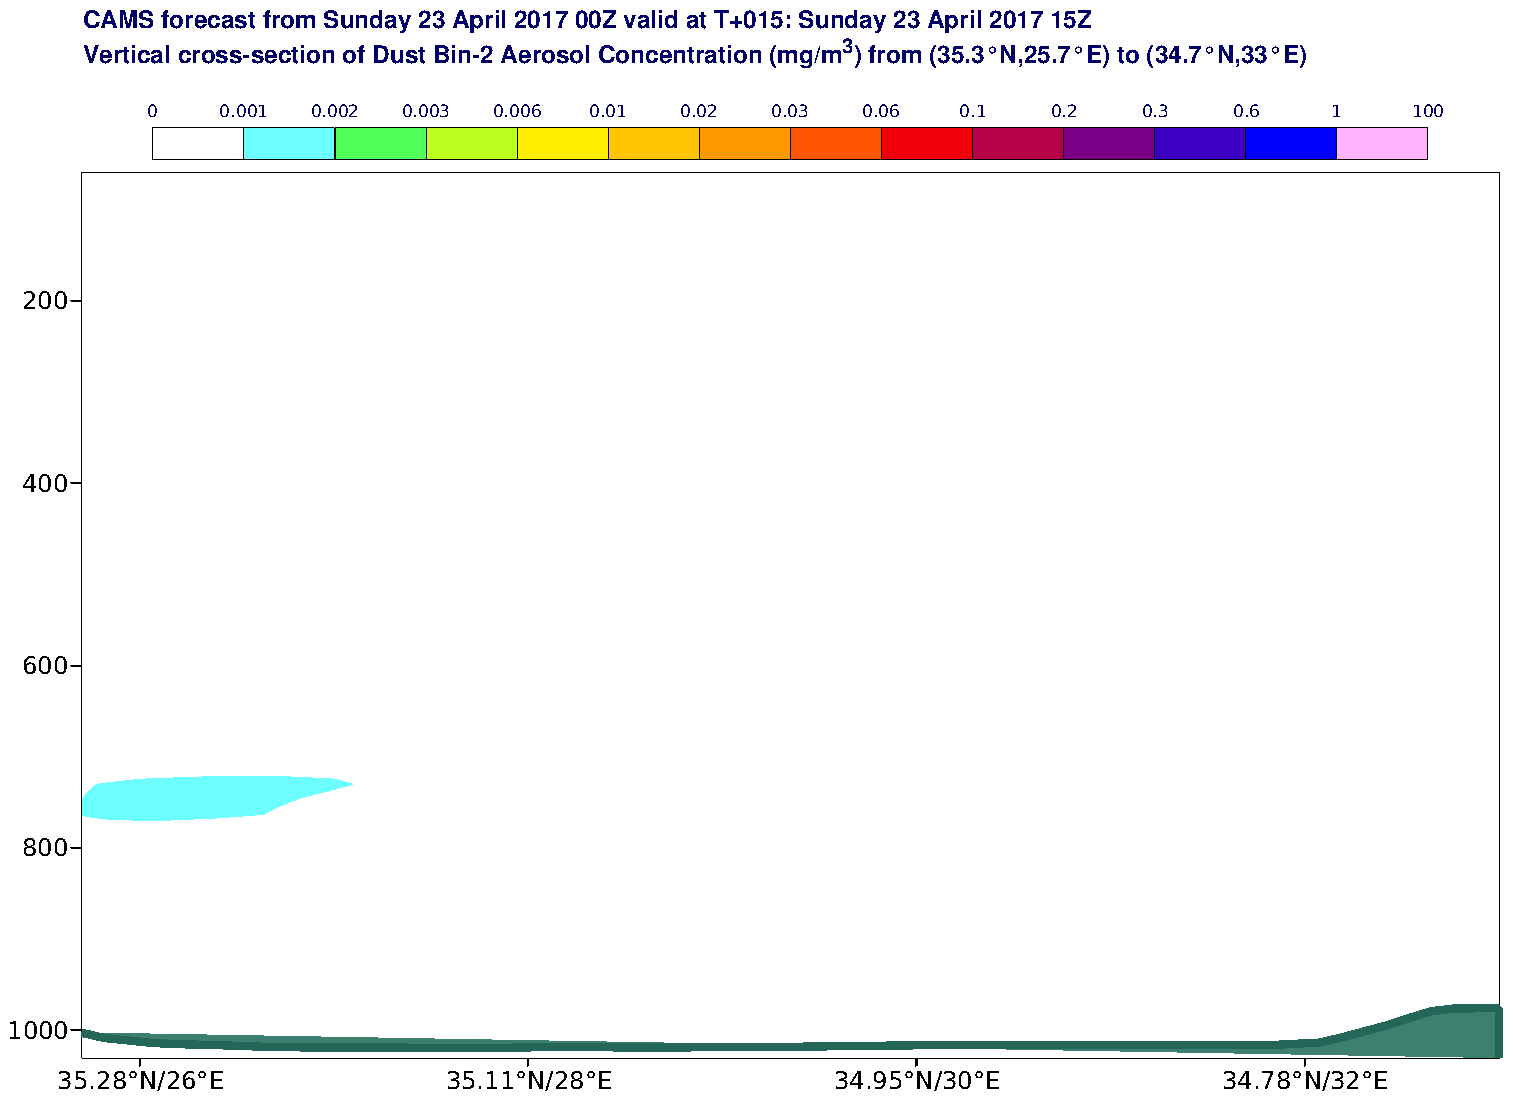 Vertical cross-section of Dust Bin-2 Aerosol Concentration (mg/m3) valid at T15 - 2017-04-23 15:00